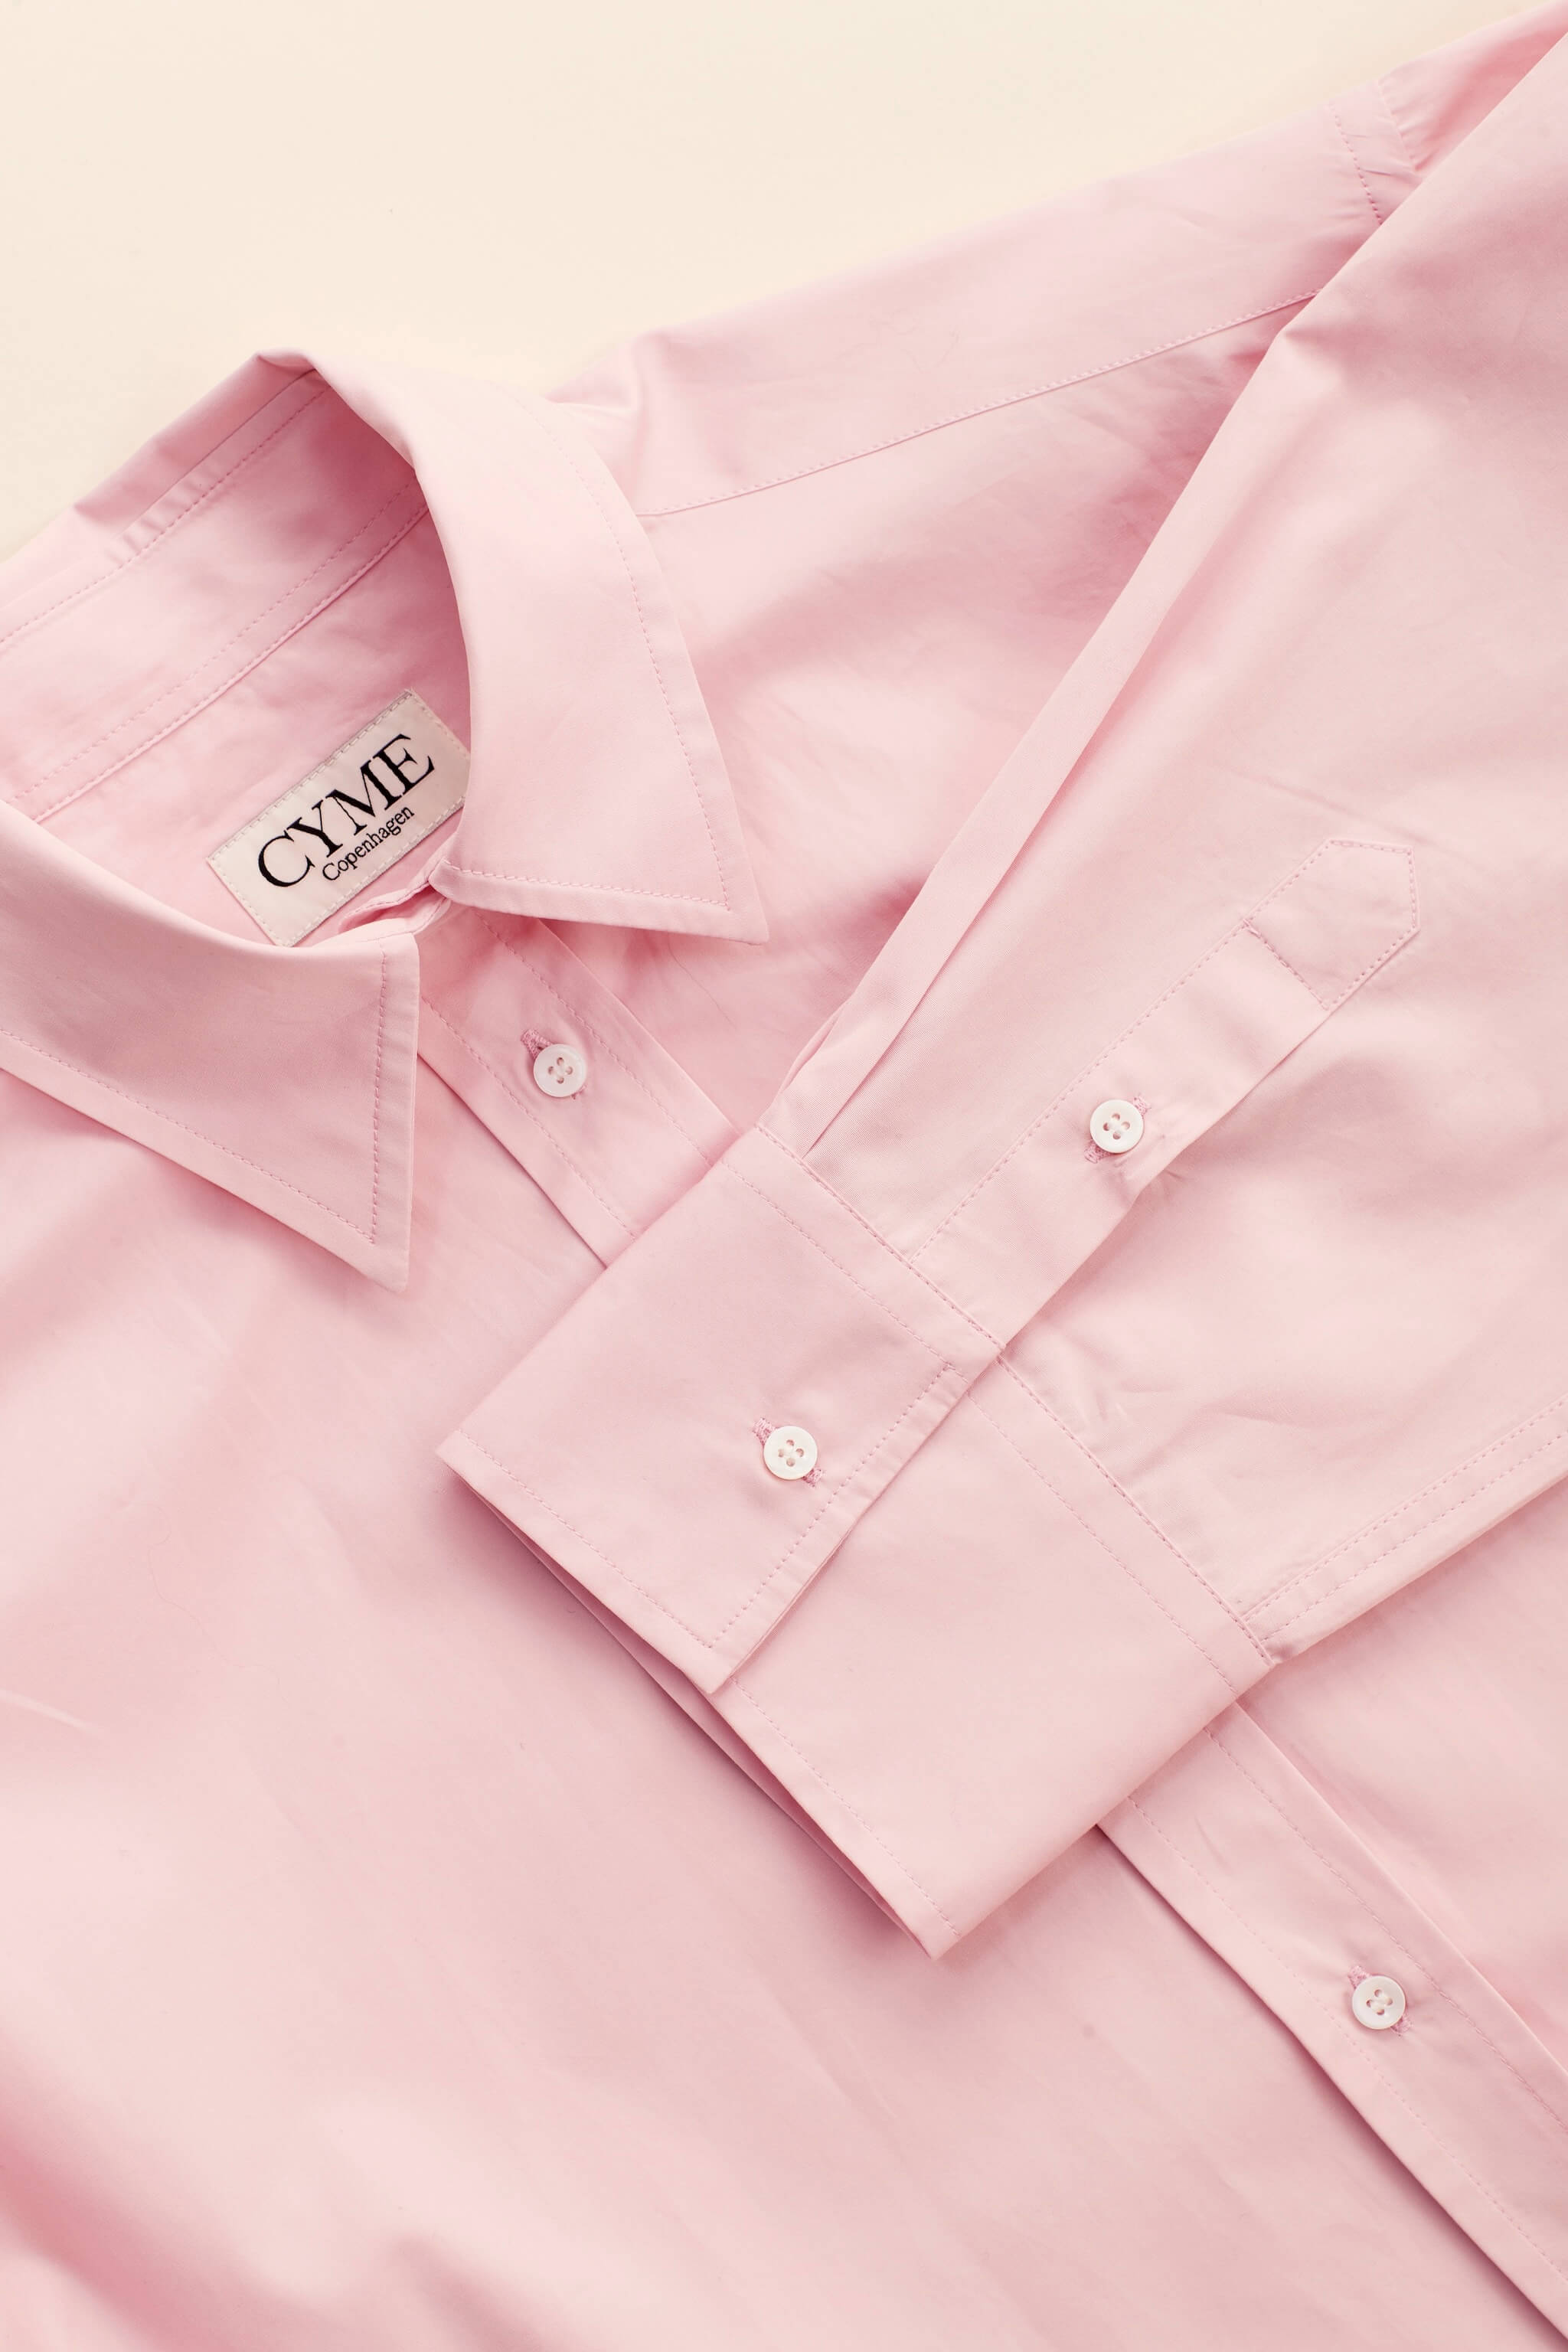 Detail of a delicate pink supima cotton shirt by Cyme Copenhagen, showcasing the brand's label, precision stitching, and commitment to sustainable fashion materials, encapsulating the ethos of a top Danish designer in women's clothing.